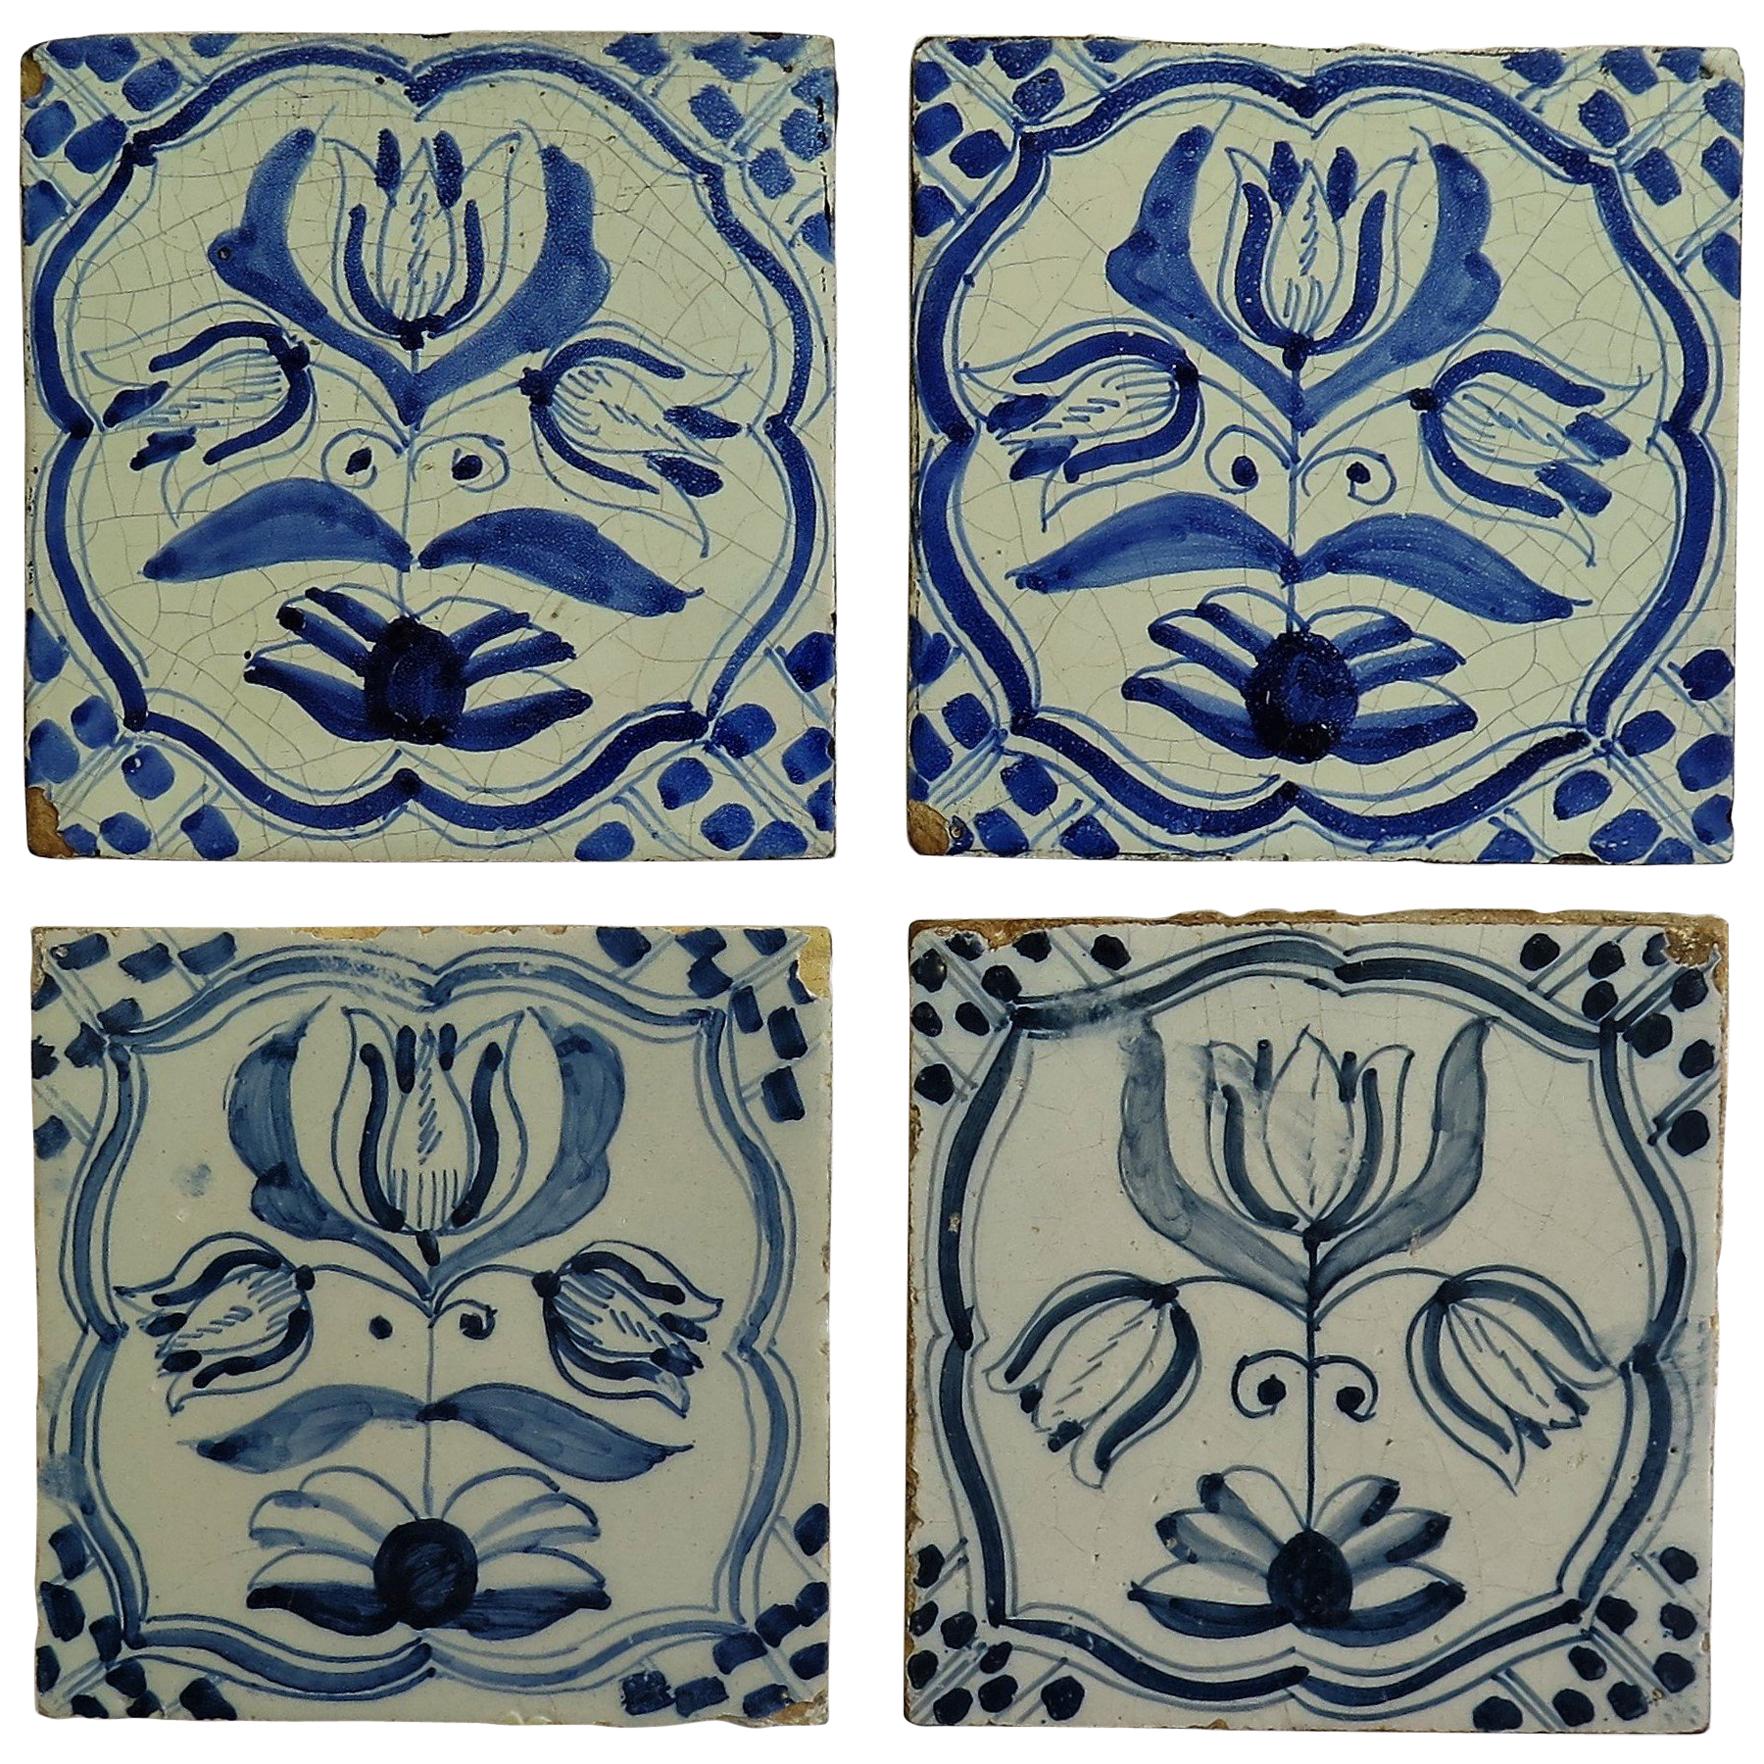 Four 17th Century Delft Ceramic Wall Tiles Blue and White Tulip Pattern, Dutch